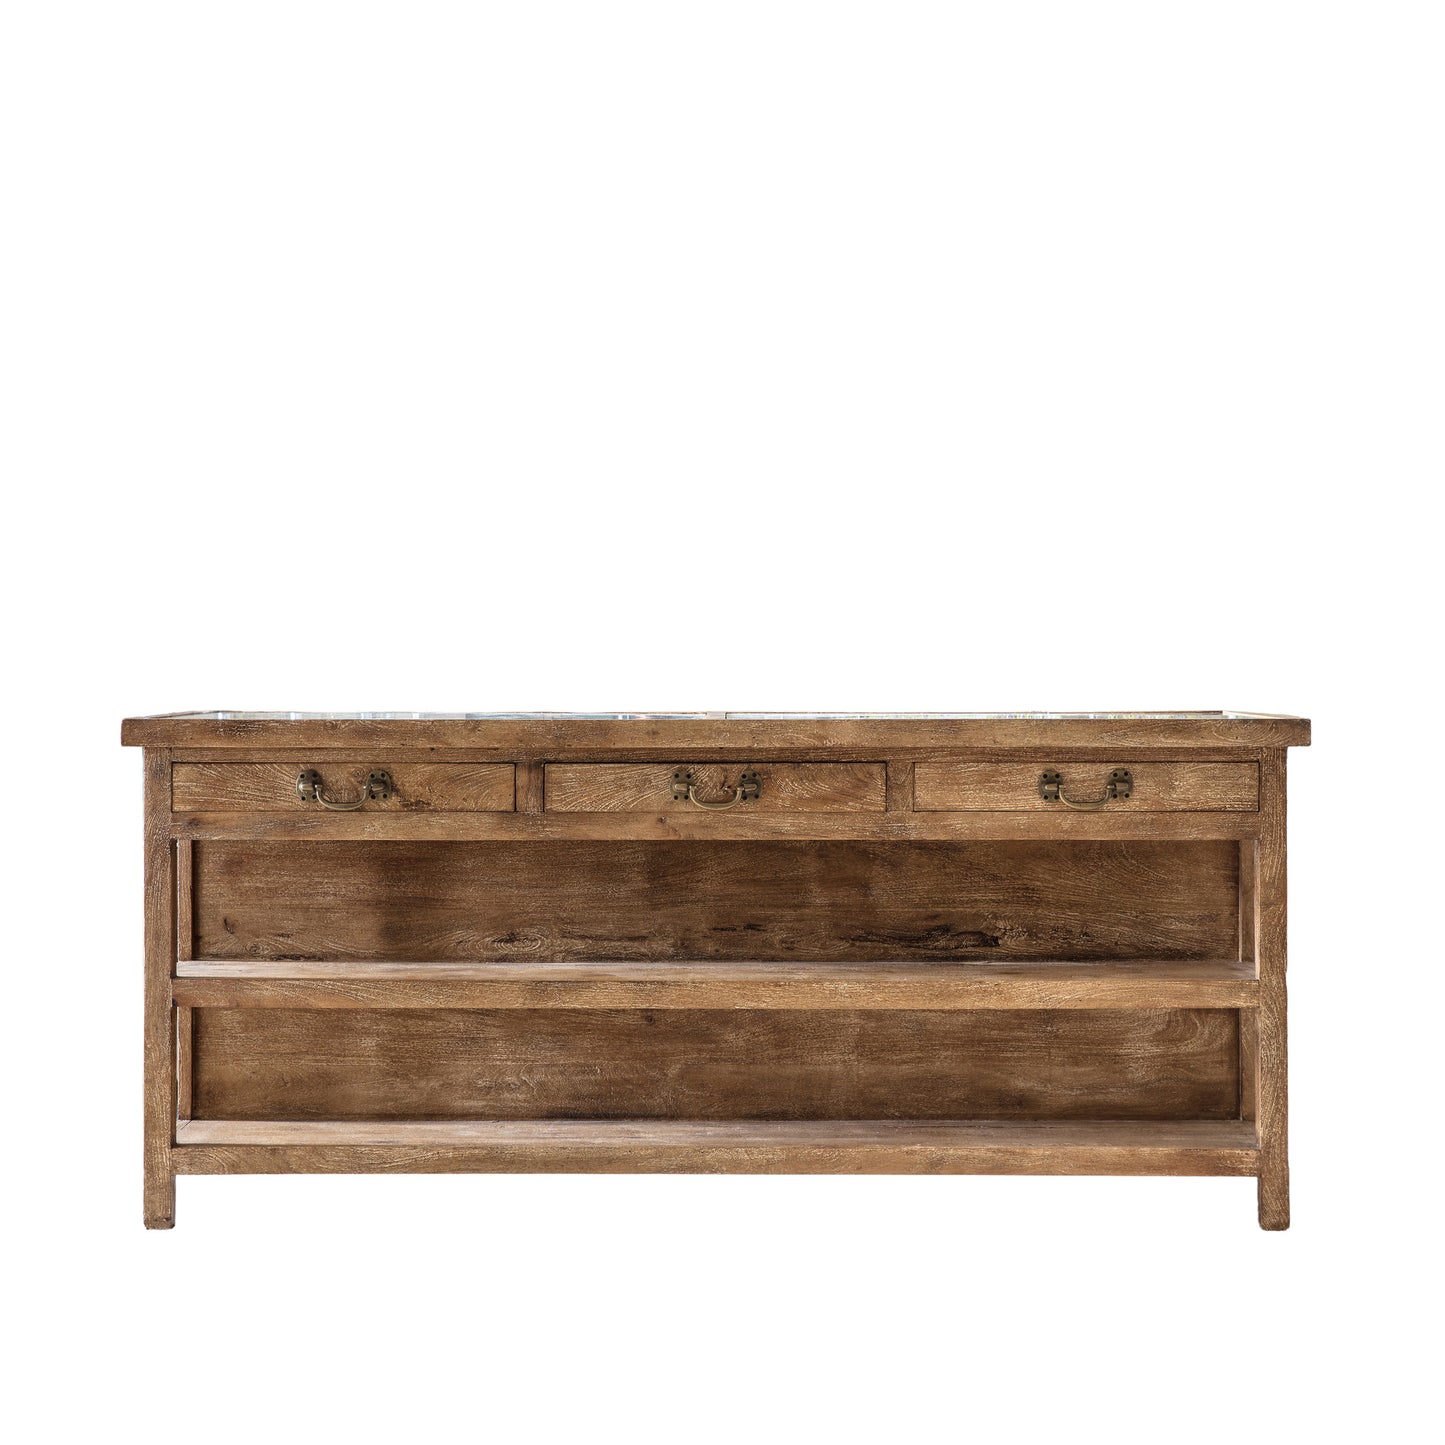 A Halwell Kitchen Island 2140x770x940mm from Kikiathome.co.uk with two drawers and brass handles, perfect for interior decor and home furniture.